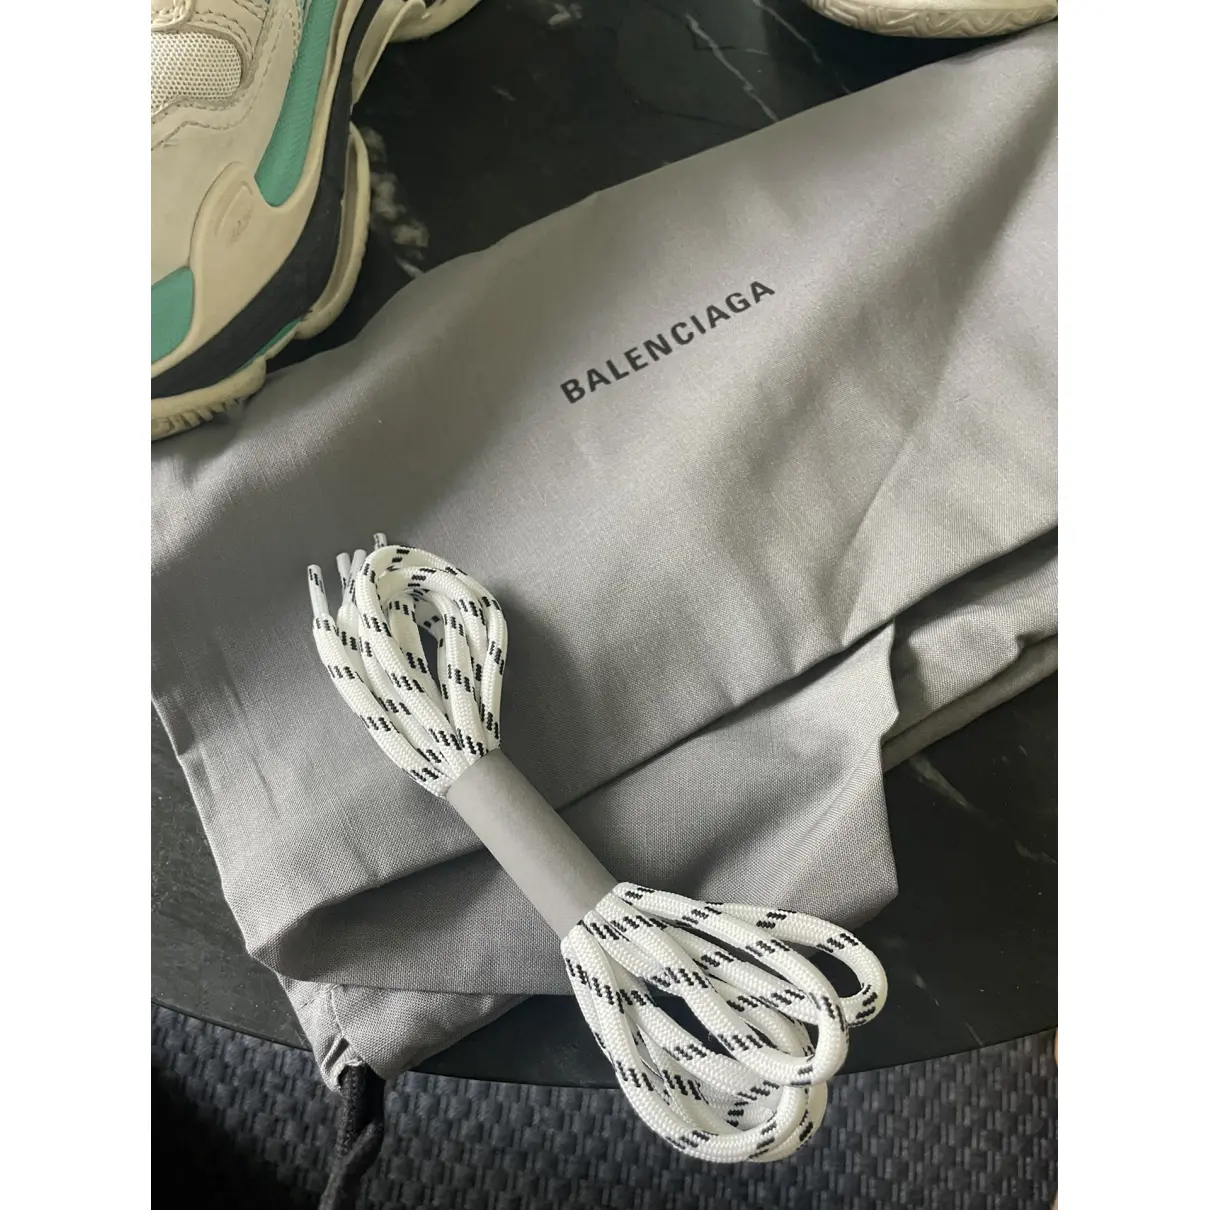 Buy Balenciaga Triple S leather trainers online